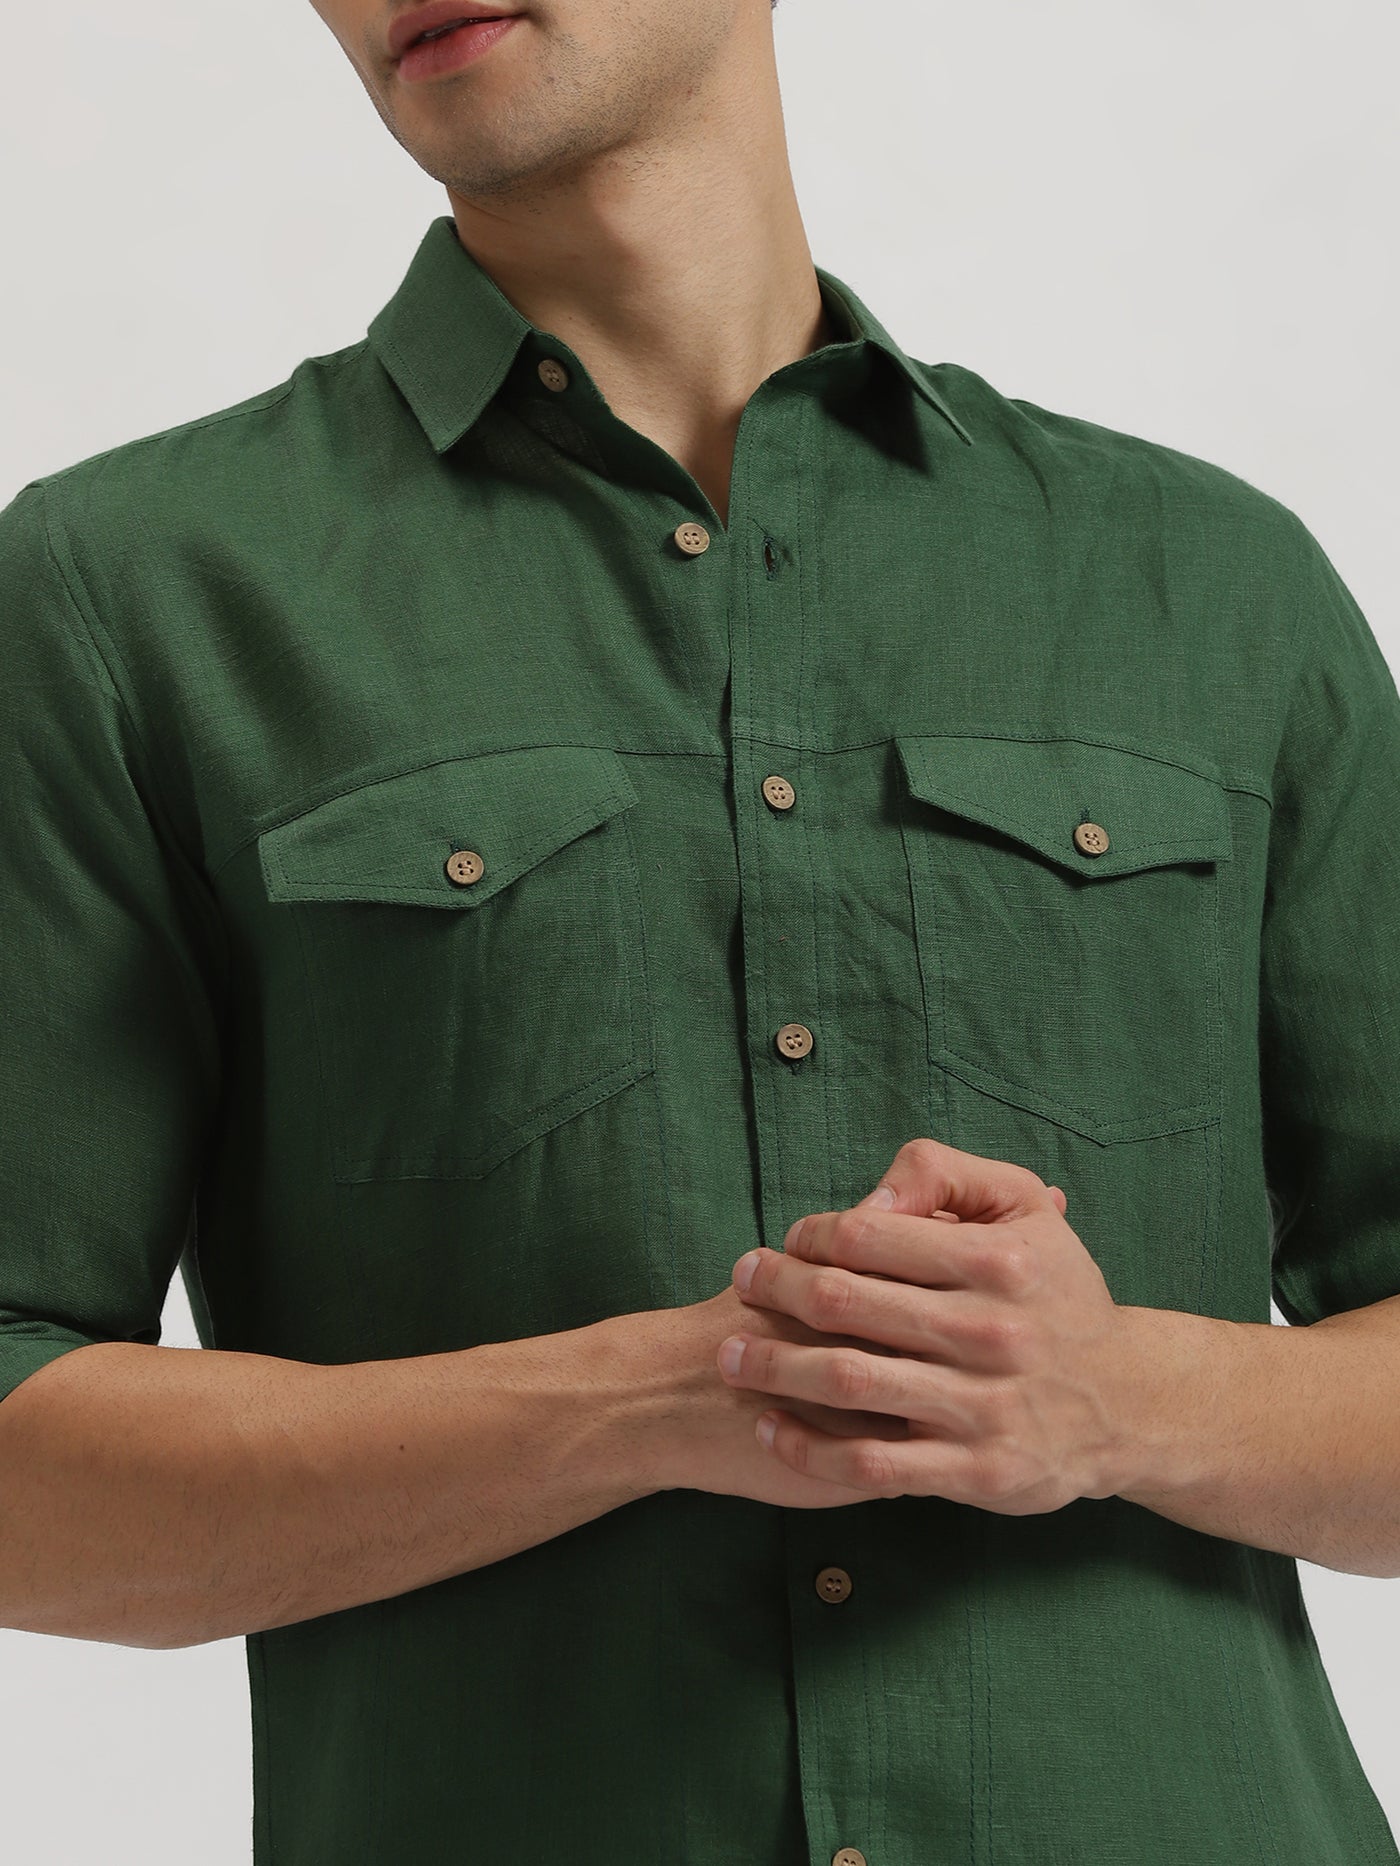 Forest Fever Look | Thomas Double Pocket Dark Green Shirt & Pure Black Trousers